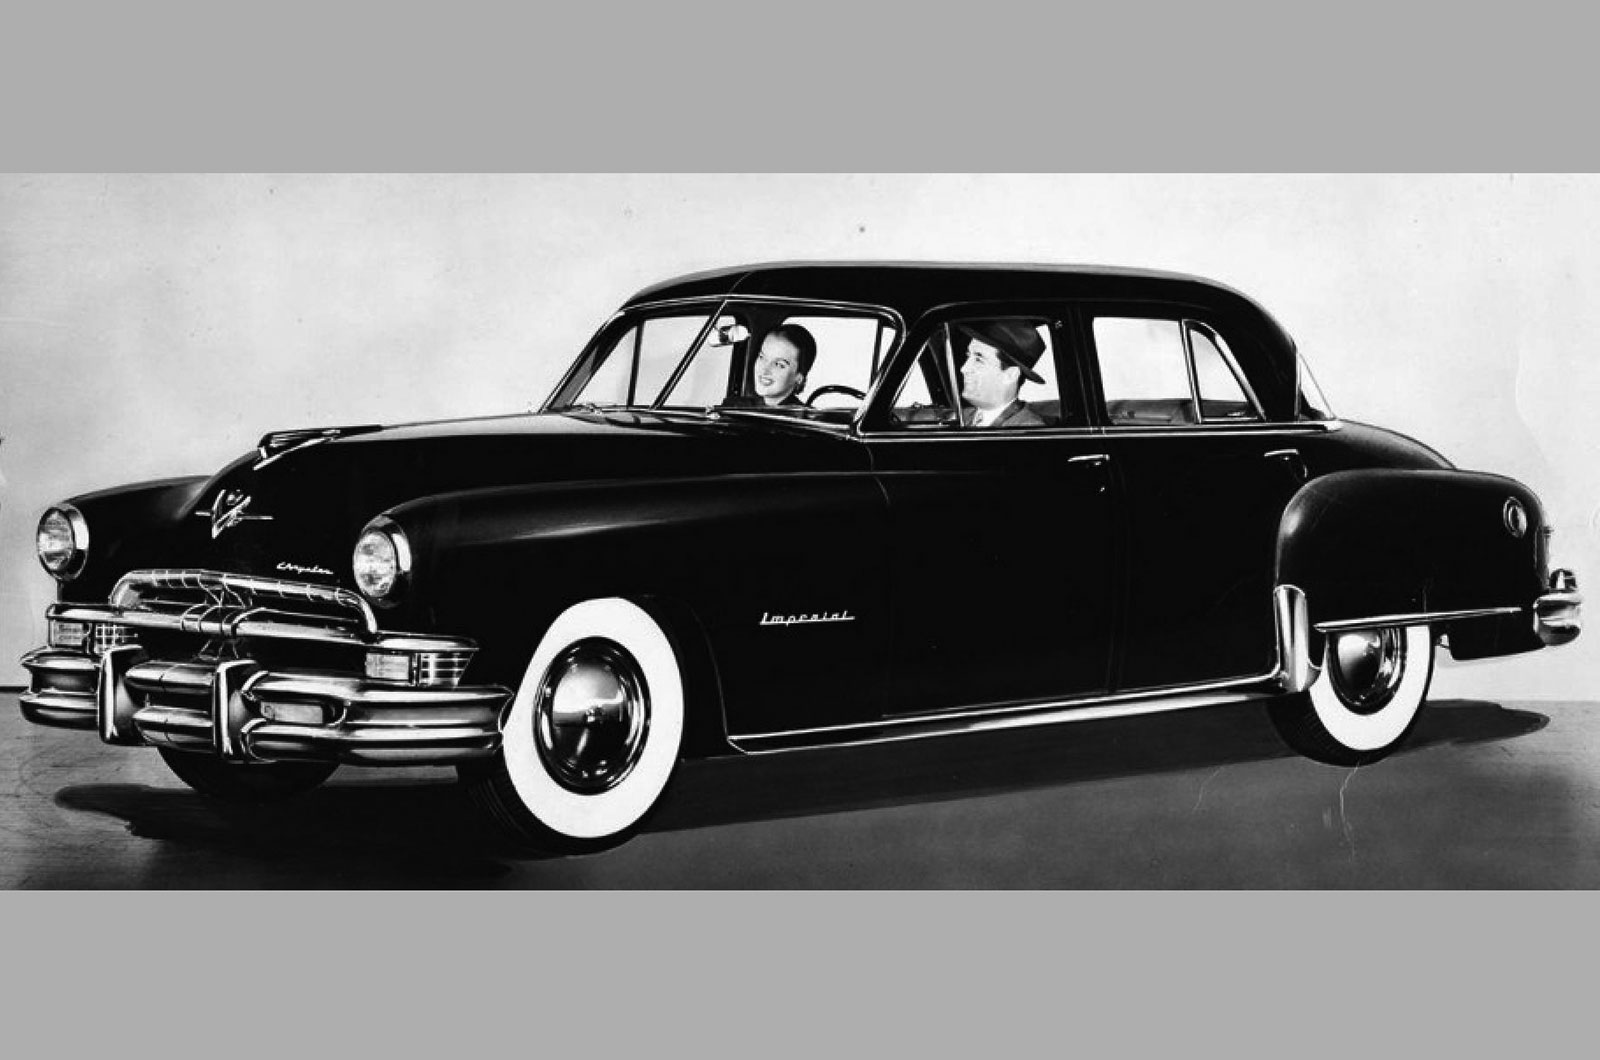 <p>As already mentioned, the first power-assisted windows were fitted to a 1940 Packard, but a hydraulic set-up was used. It wouldn’t be until 1951 that electric-powered windows were fitted to a series production car; the <strong>Chrysler Imperial</strong> was the first to feature them, though it seems that certain high-end Daimlers in England may have got them in small numbers as early as 1947.</p><p><strong>GROUNDBREAKER SCORE: 8 </strong>– very hard to buy a car today without them.</p>